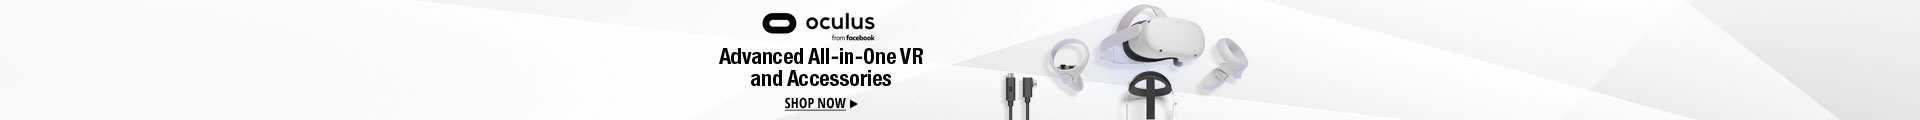 Advanced all-in-one VR and accessories